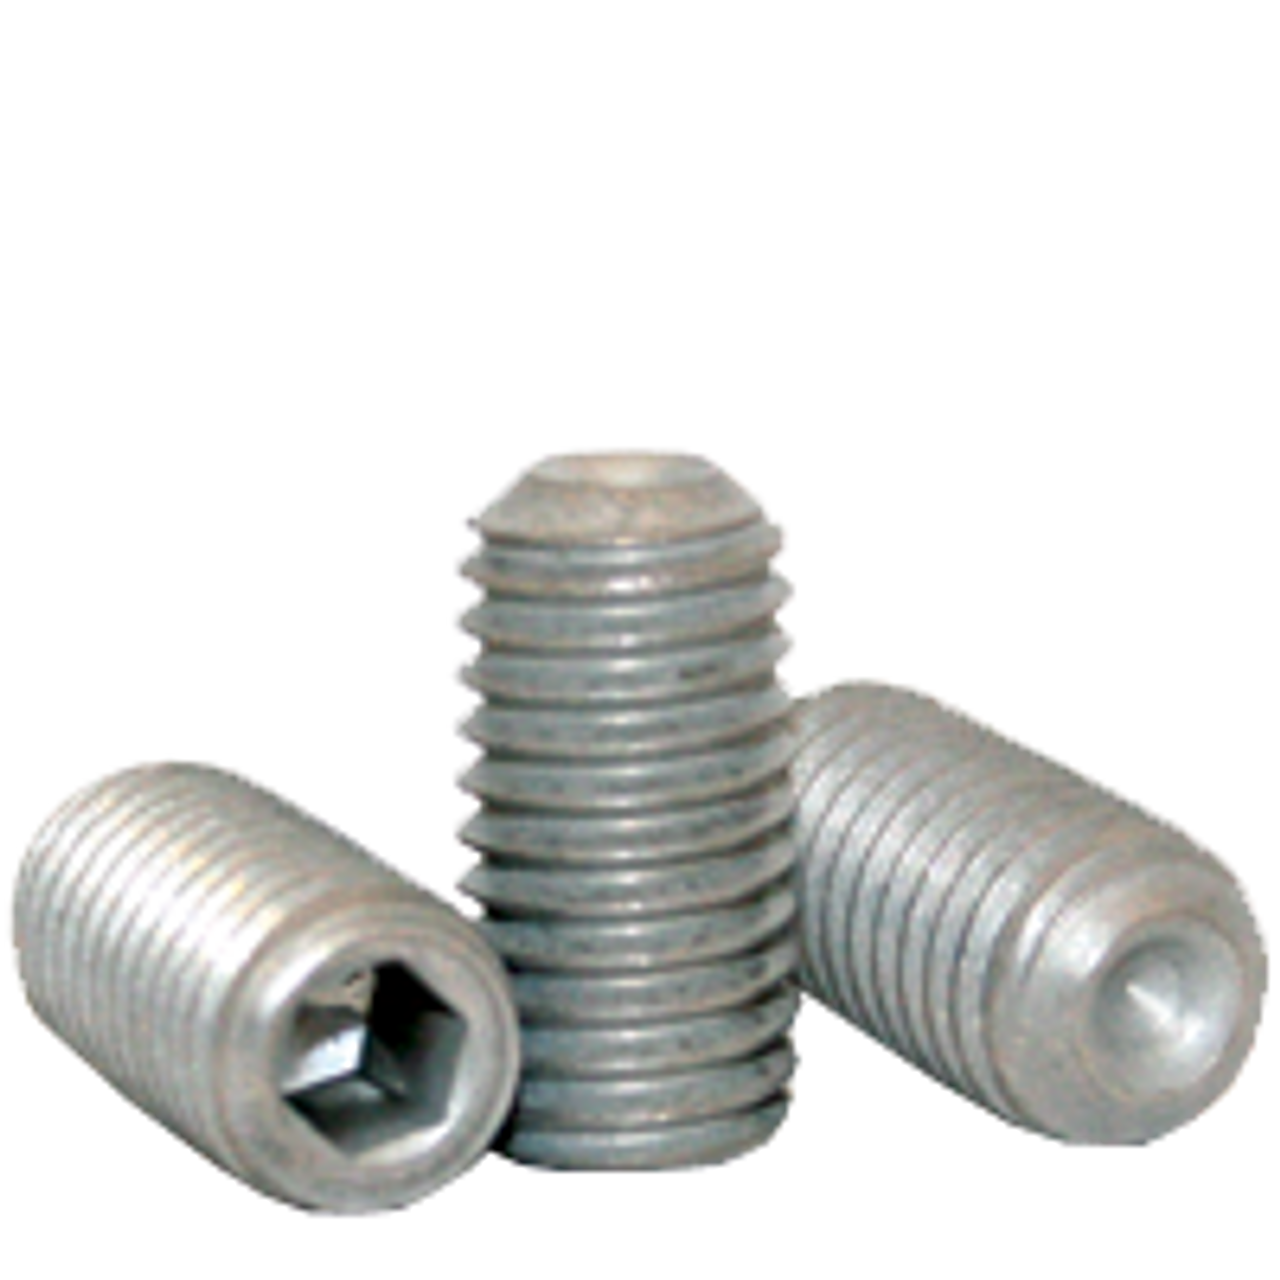 8-32 x 3/4" Socket Set Screws Allen Drive Cup Point Stainless Steel Qty 1000